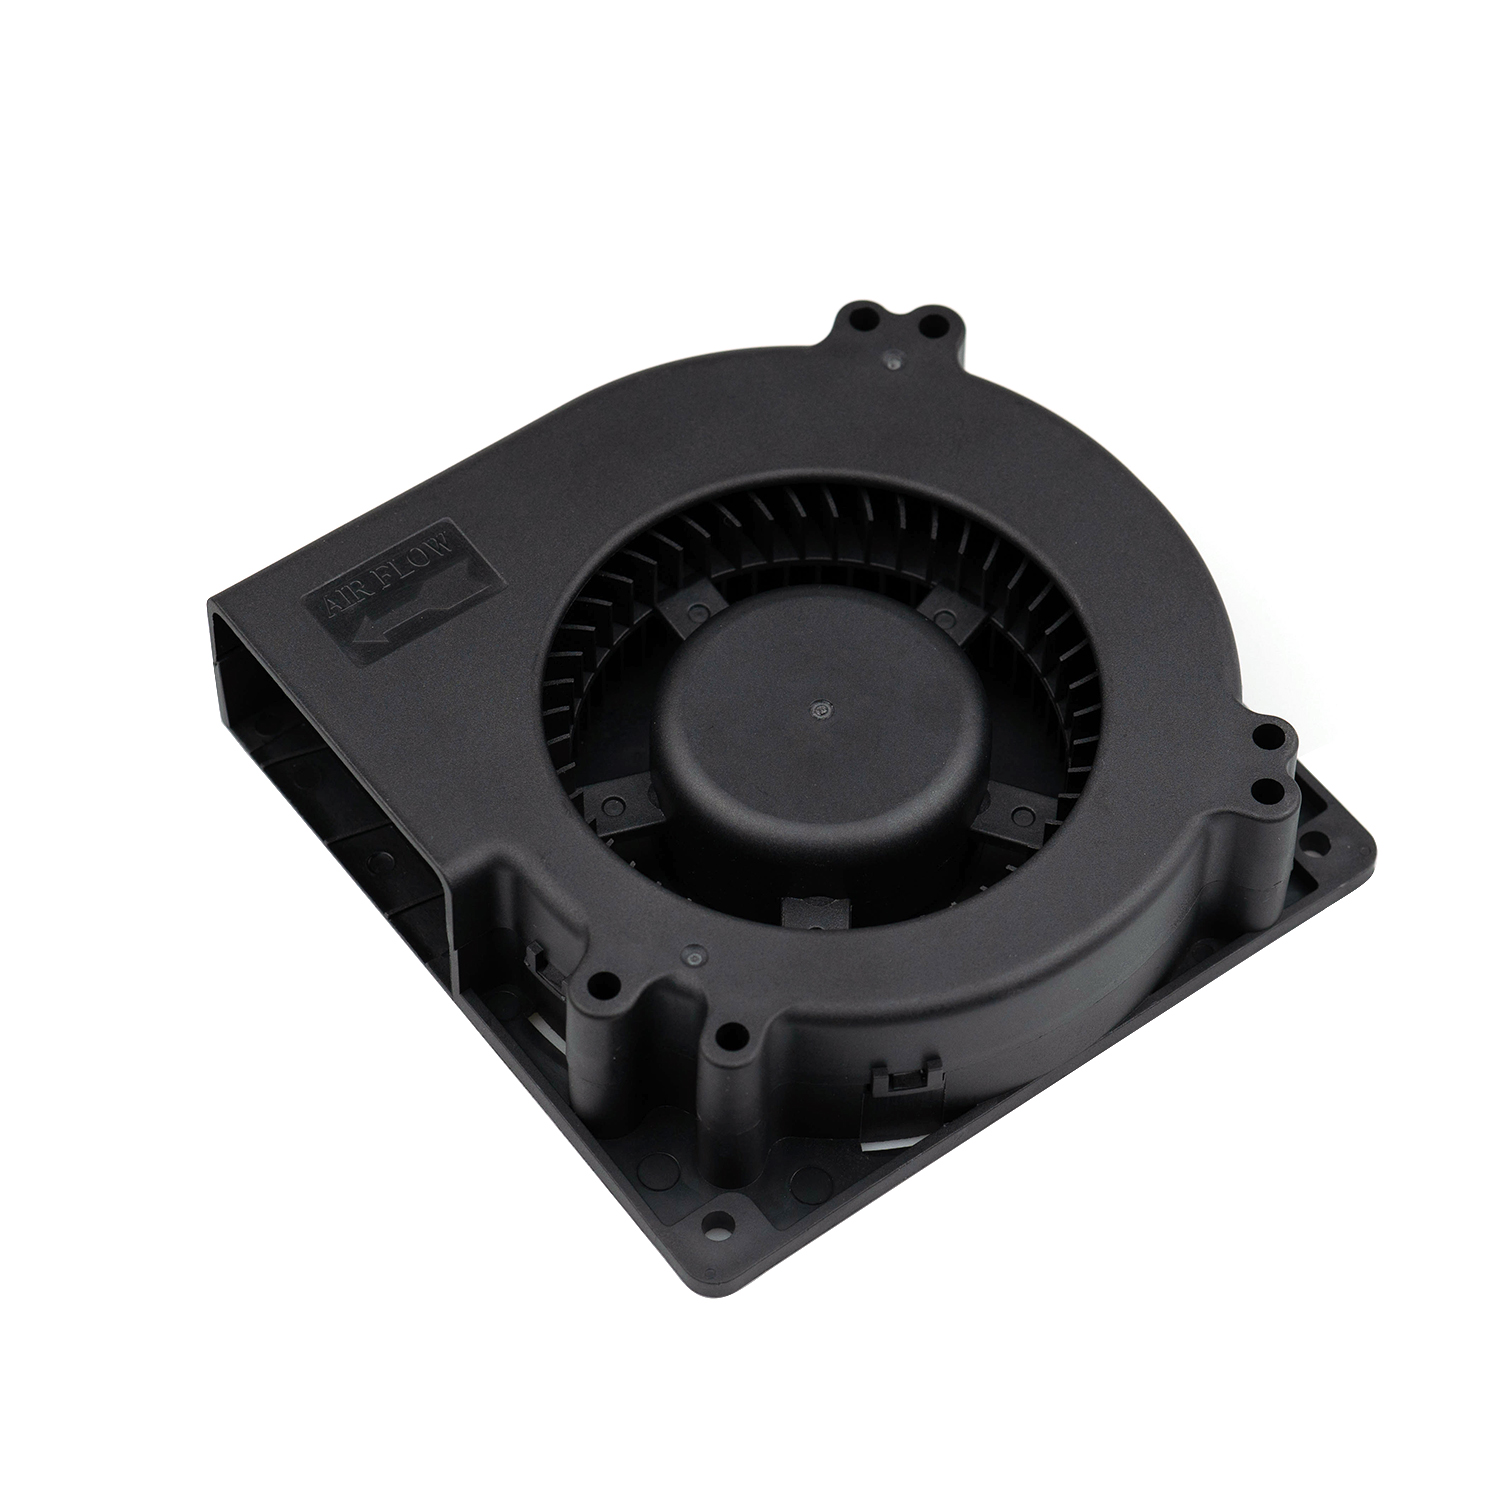 120 x 32 mm 12 v dc blower fan with speed control